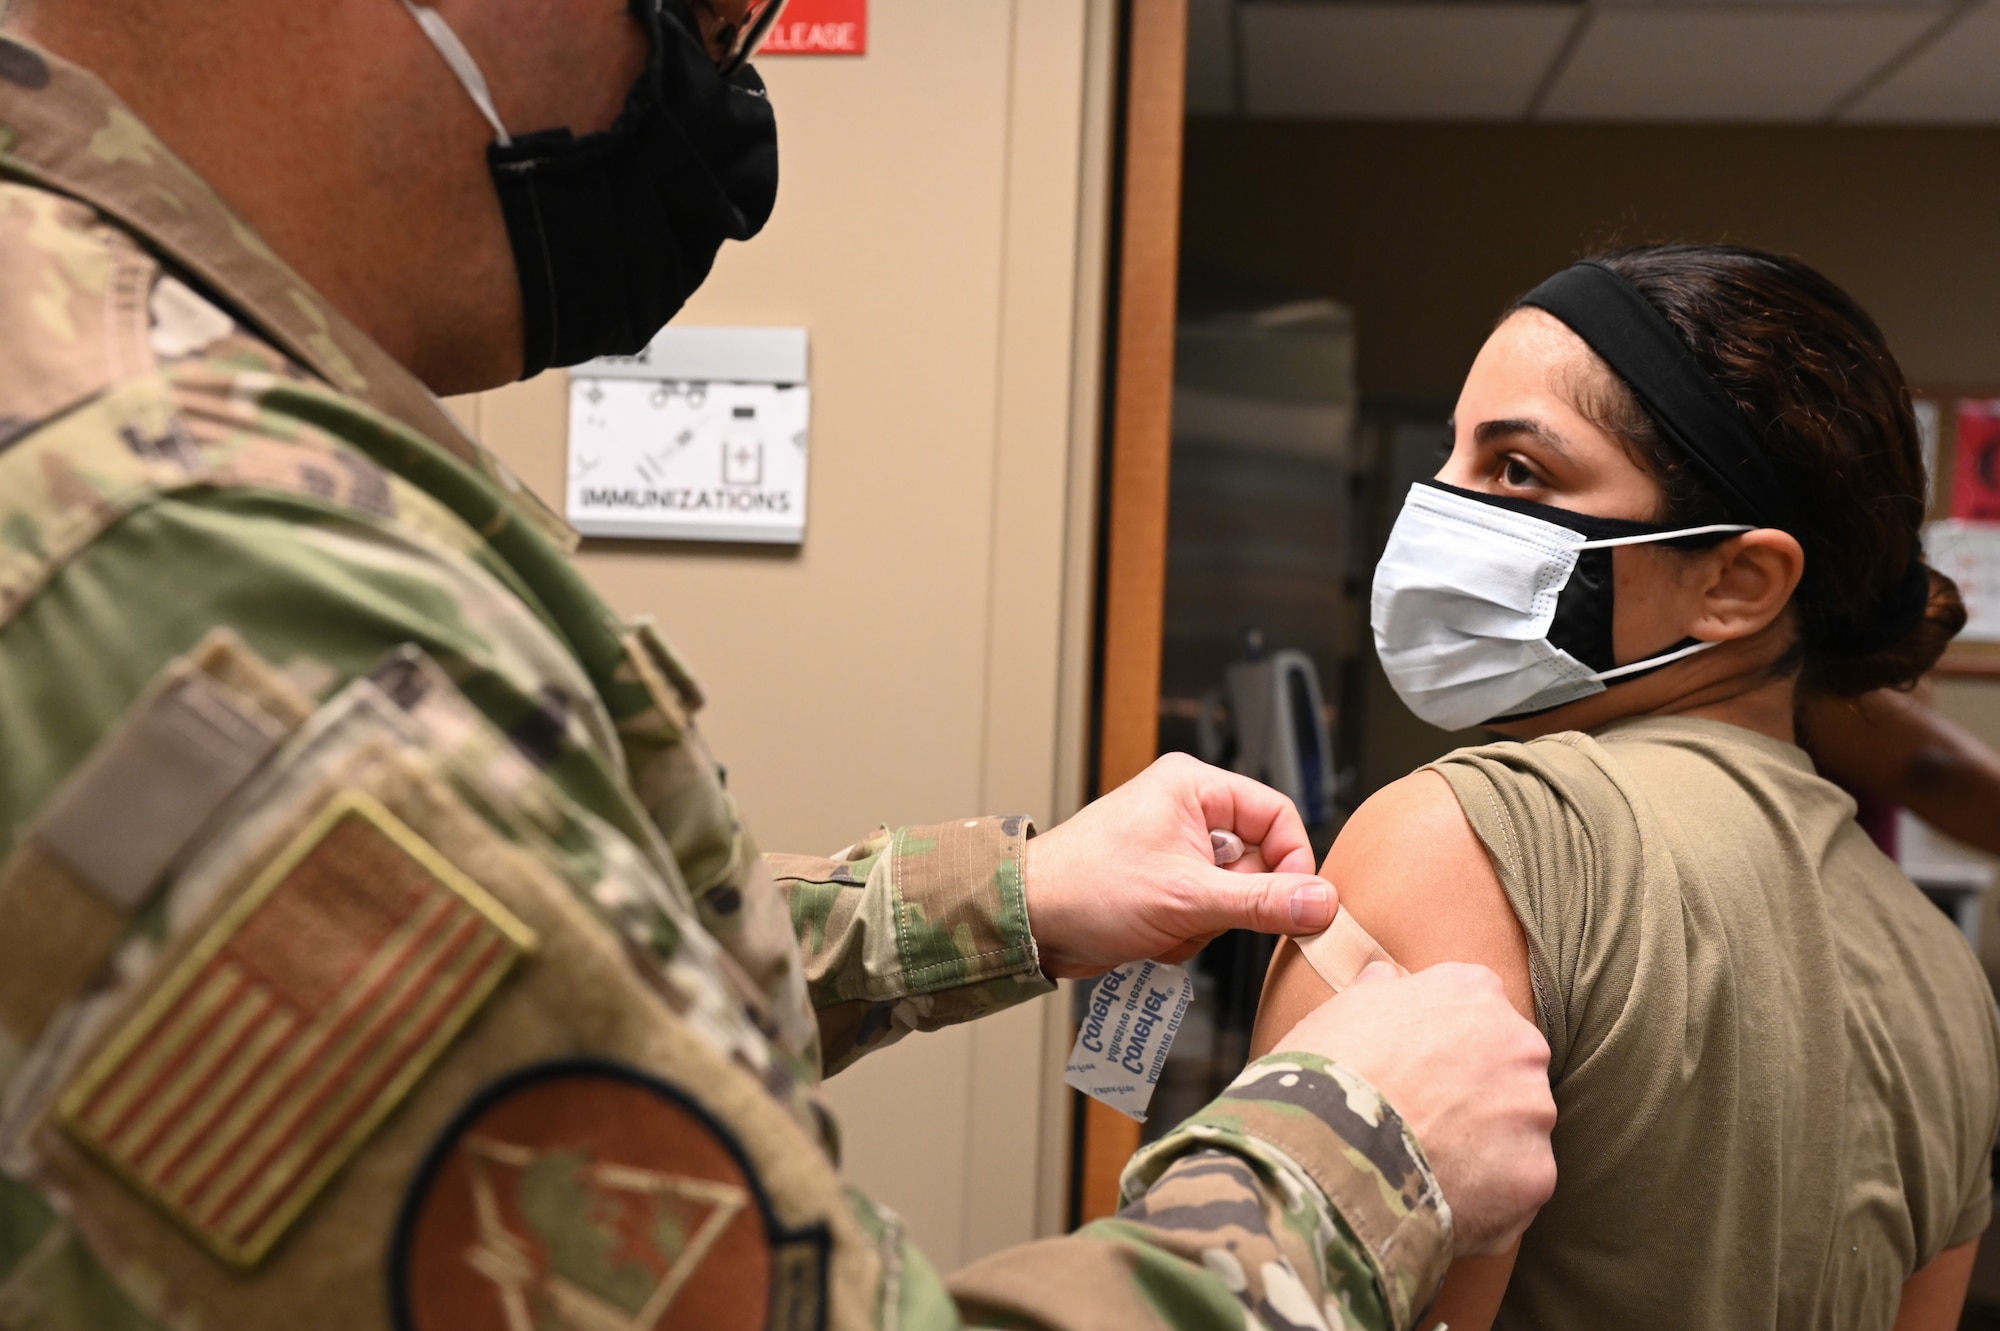 Airmen from the 2nd Medical Group receive the first doses of the COVID-19 vaccination at Barksdale Air Force Base, La., Jan. 6, 2021. Vaccines authorized for emergency use (EUA) are offered on a voluntary basis. (U.S. Air Force photo by Senior Airman Christina Graves)